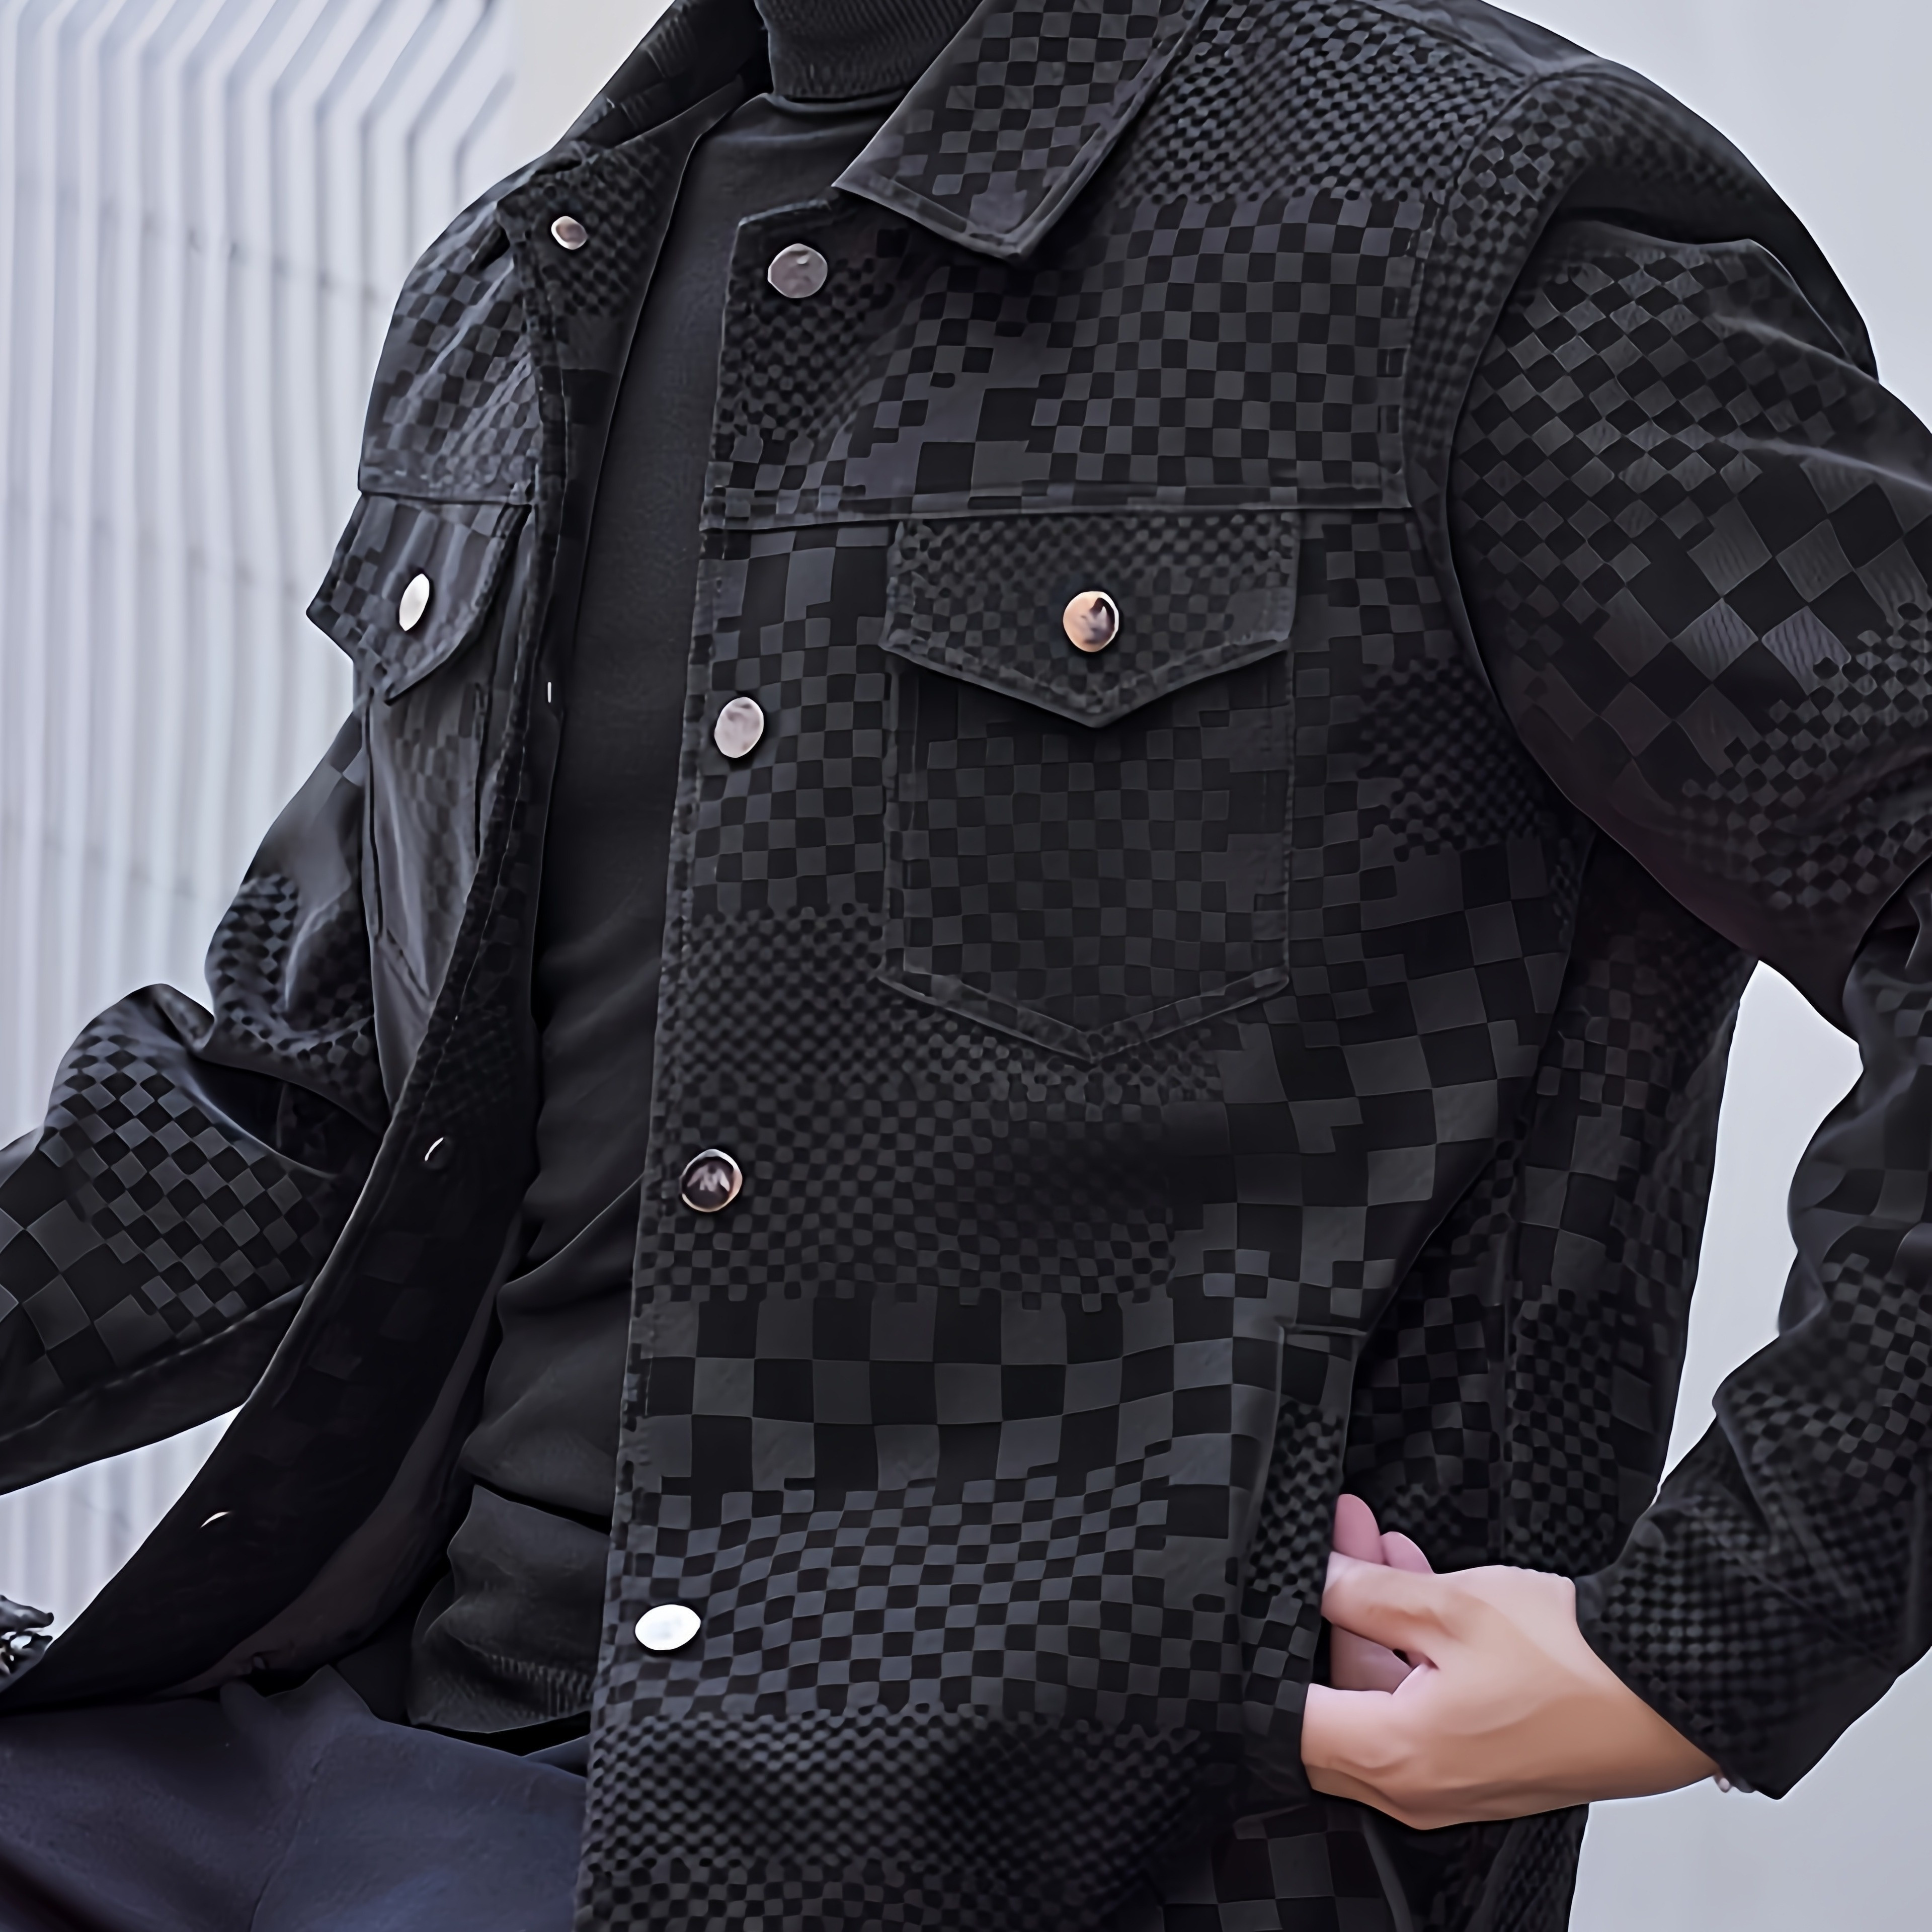 

Men's Casual Checkerboard Pattern Pu Leather Jacket, Button Up Lapel Jacket